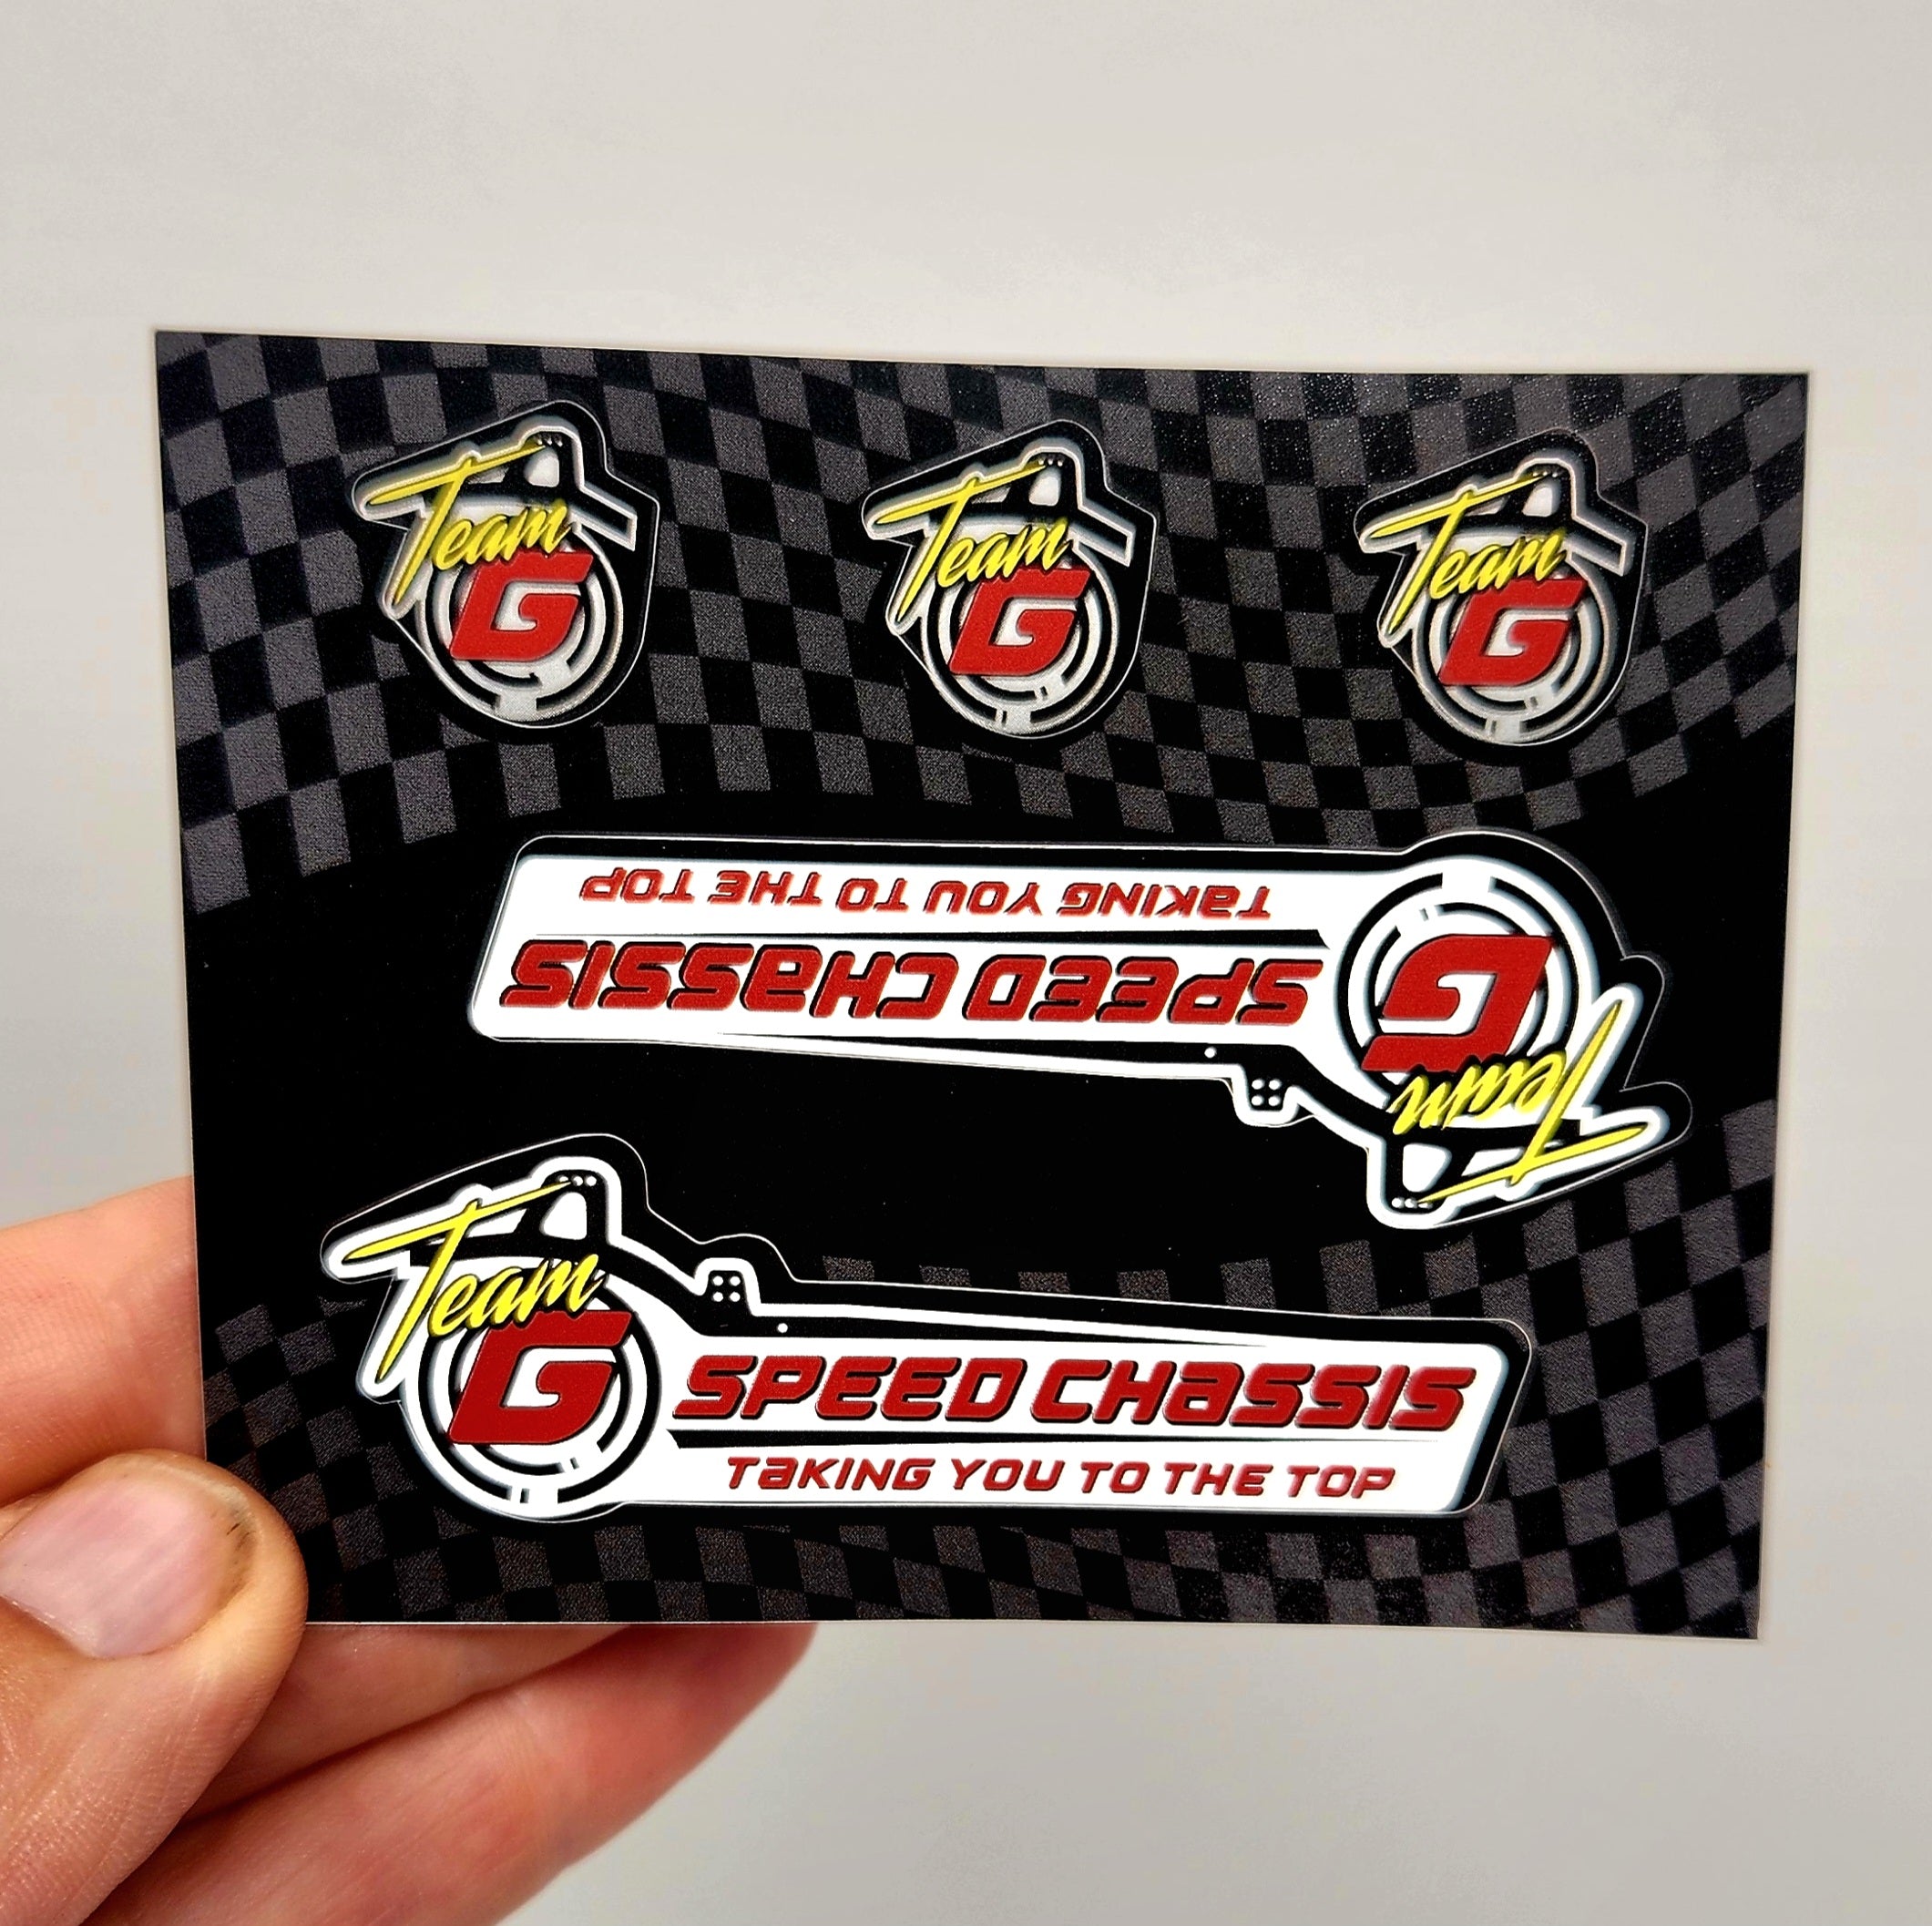 GSPEED Chassis sticker sheet